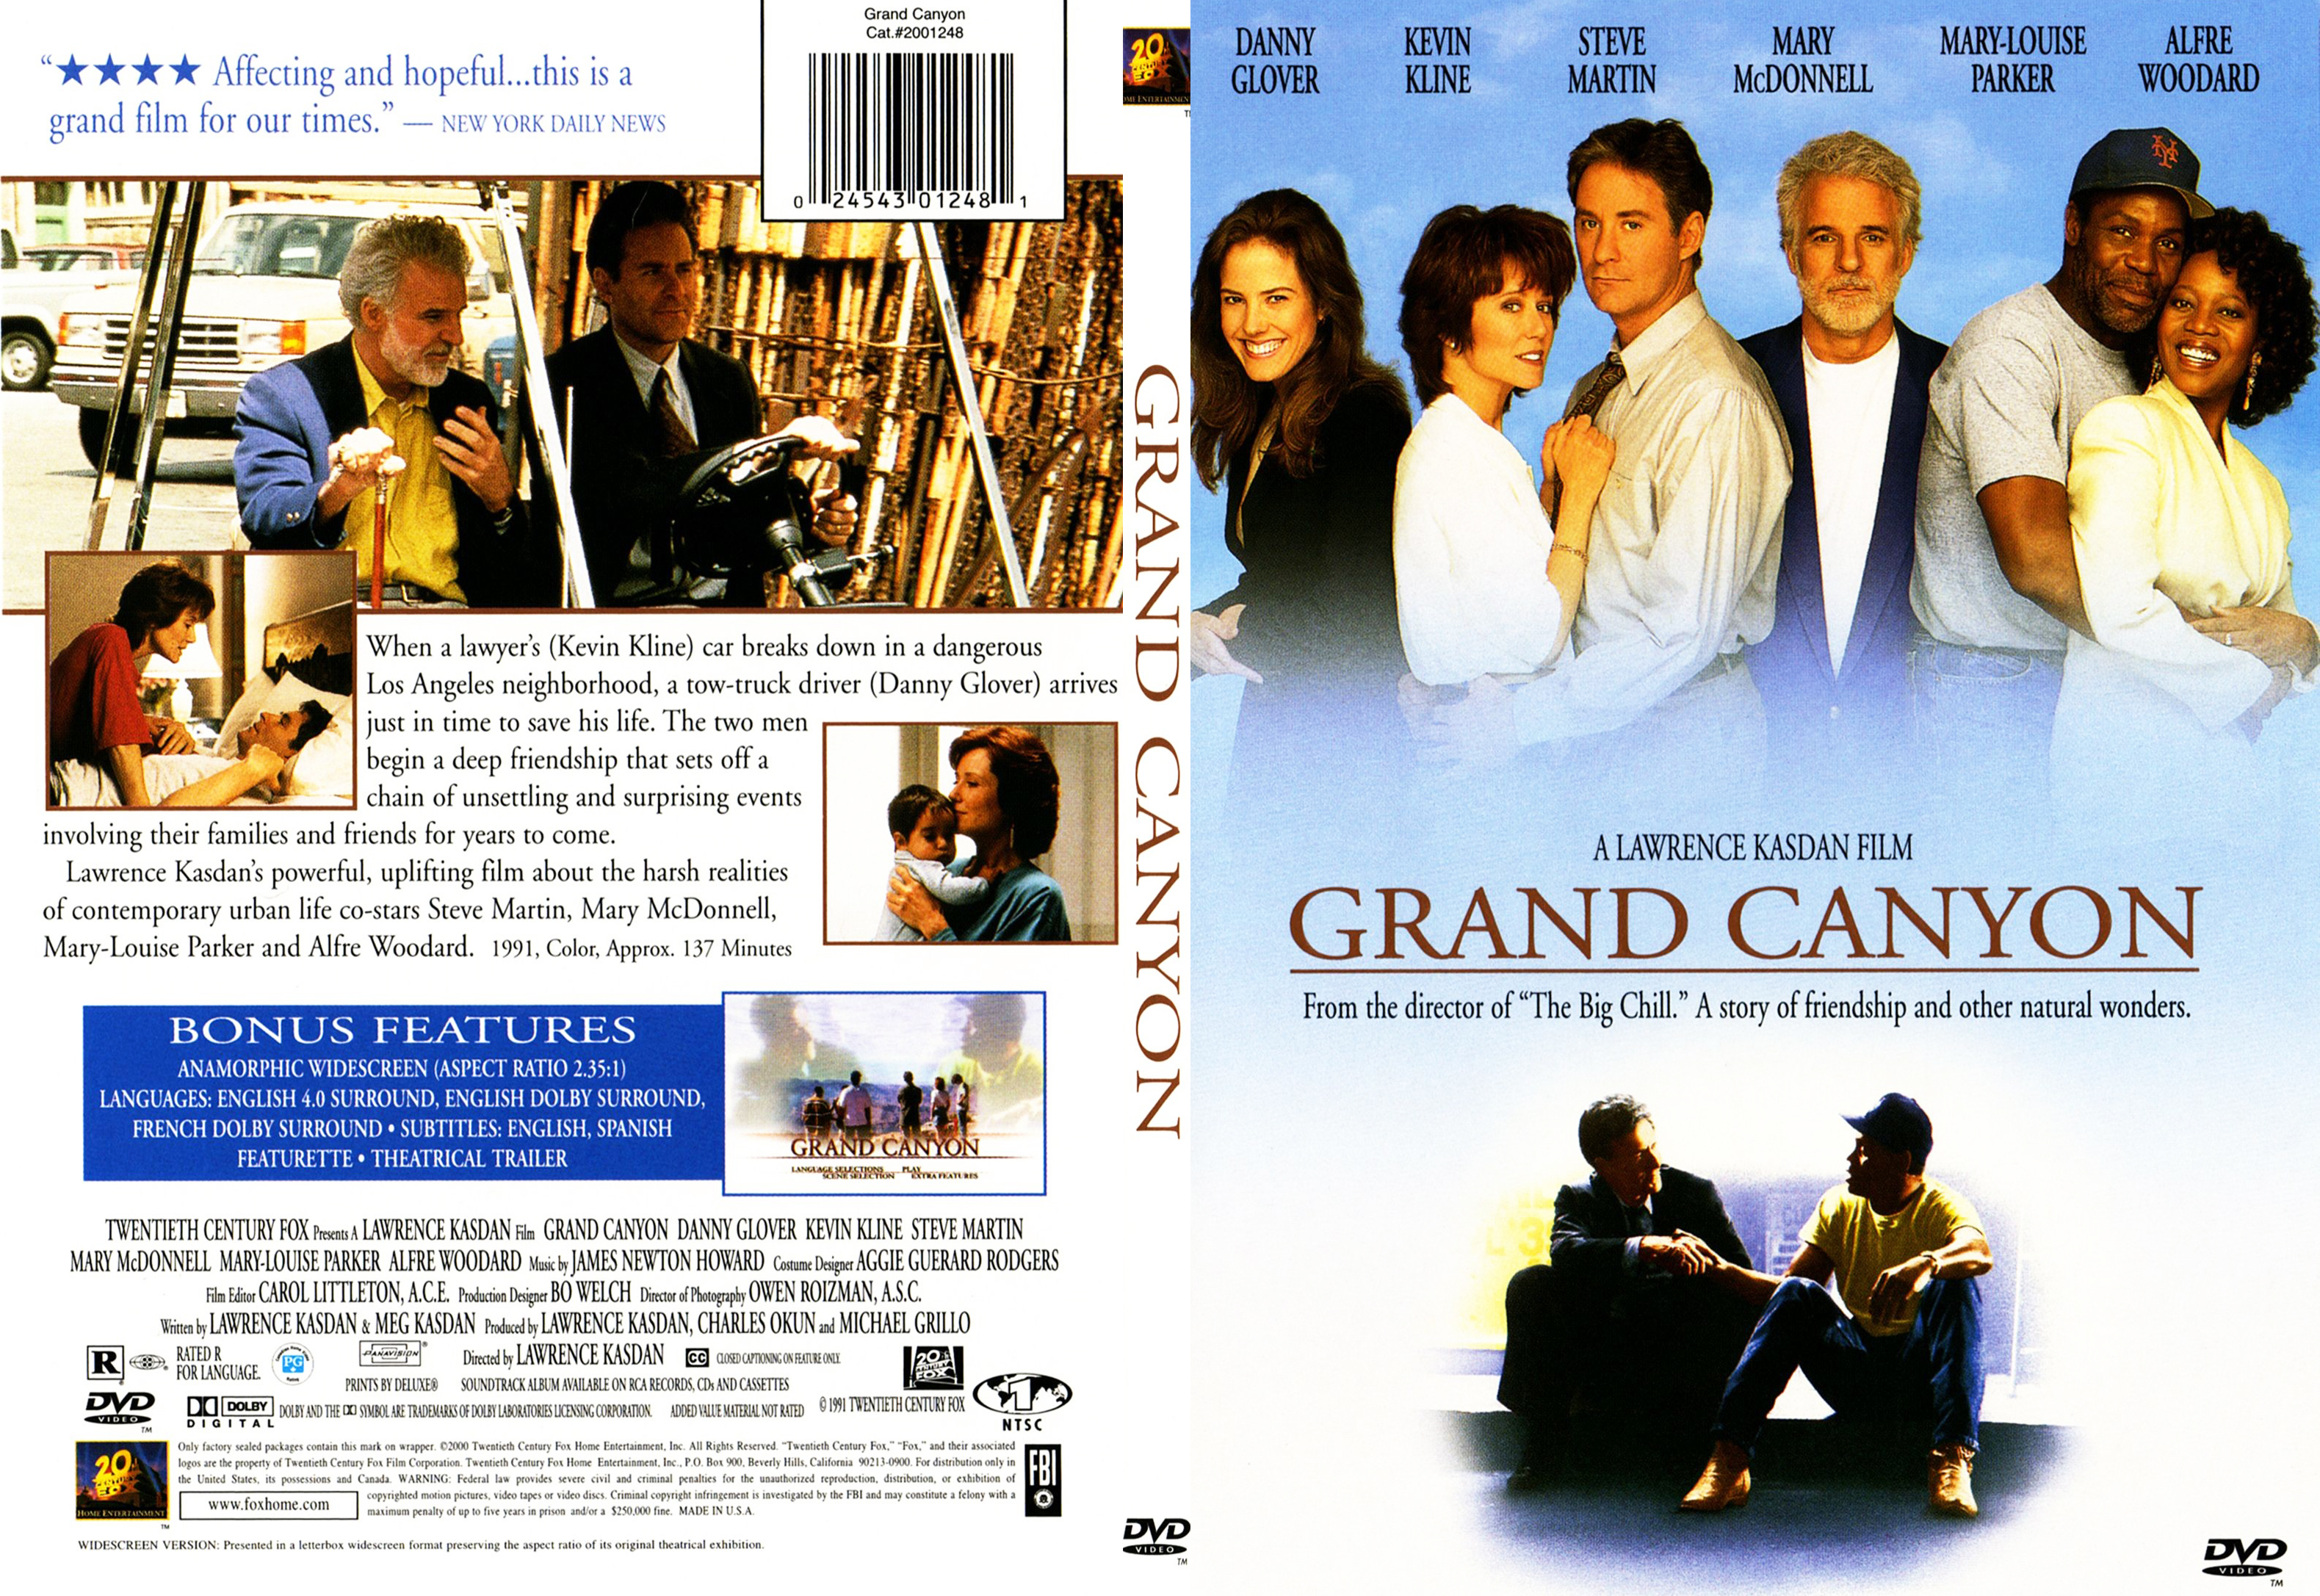 Jaquette DVD Grand canyon - SLIM